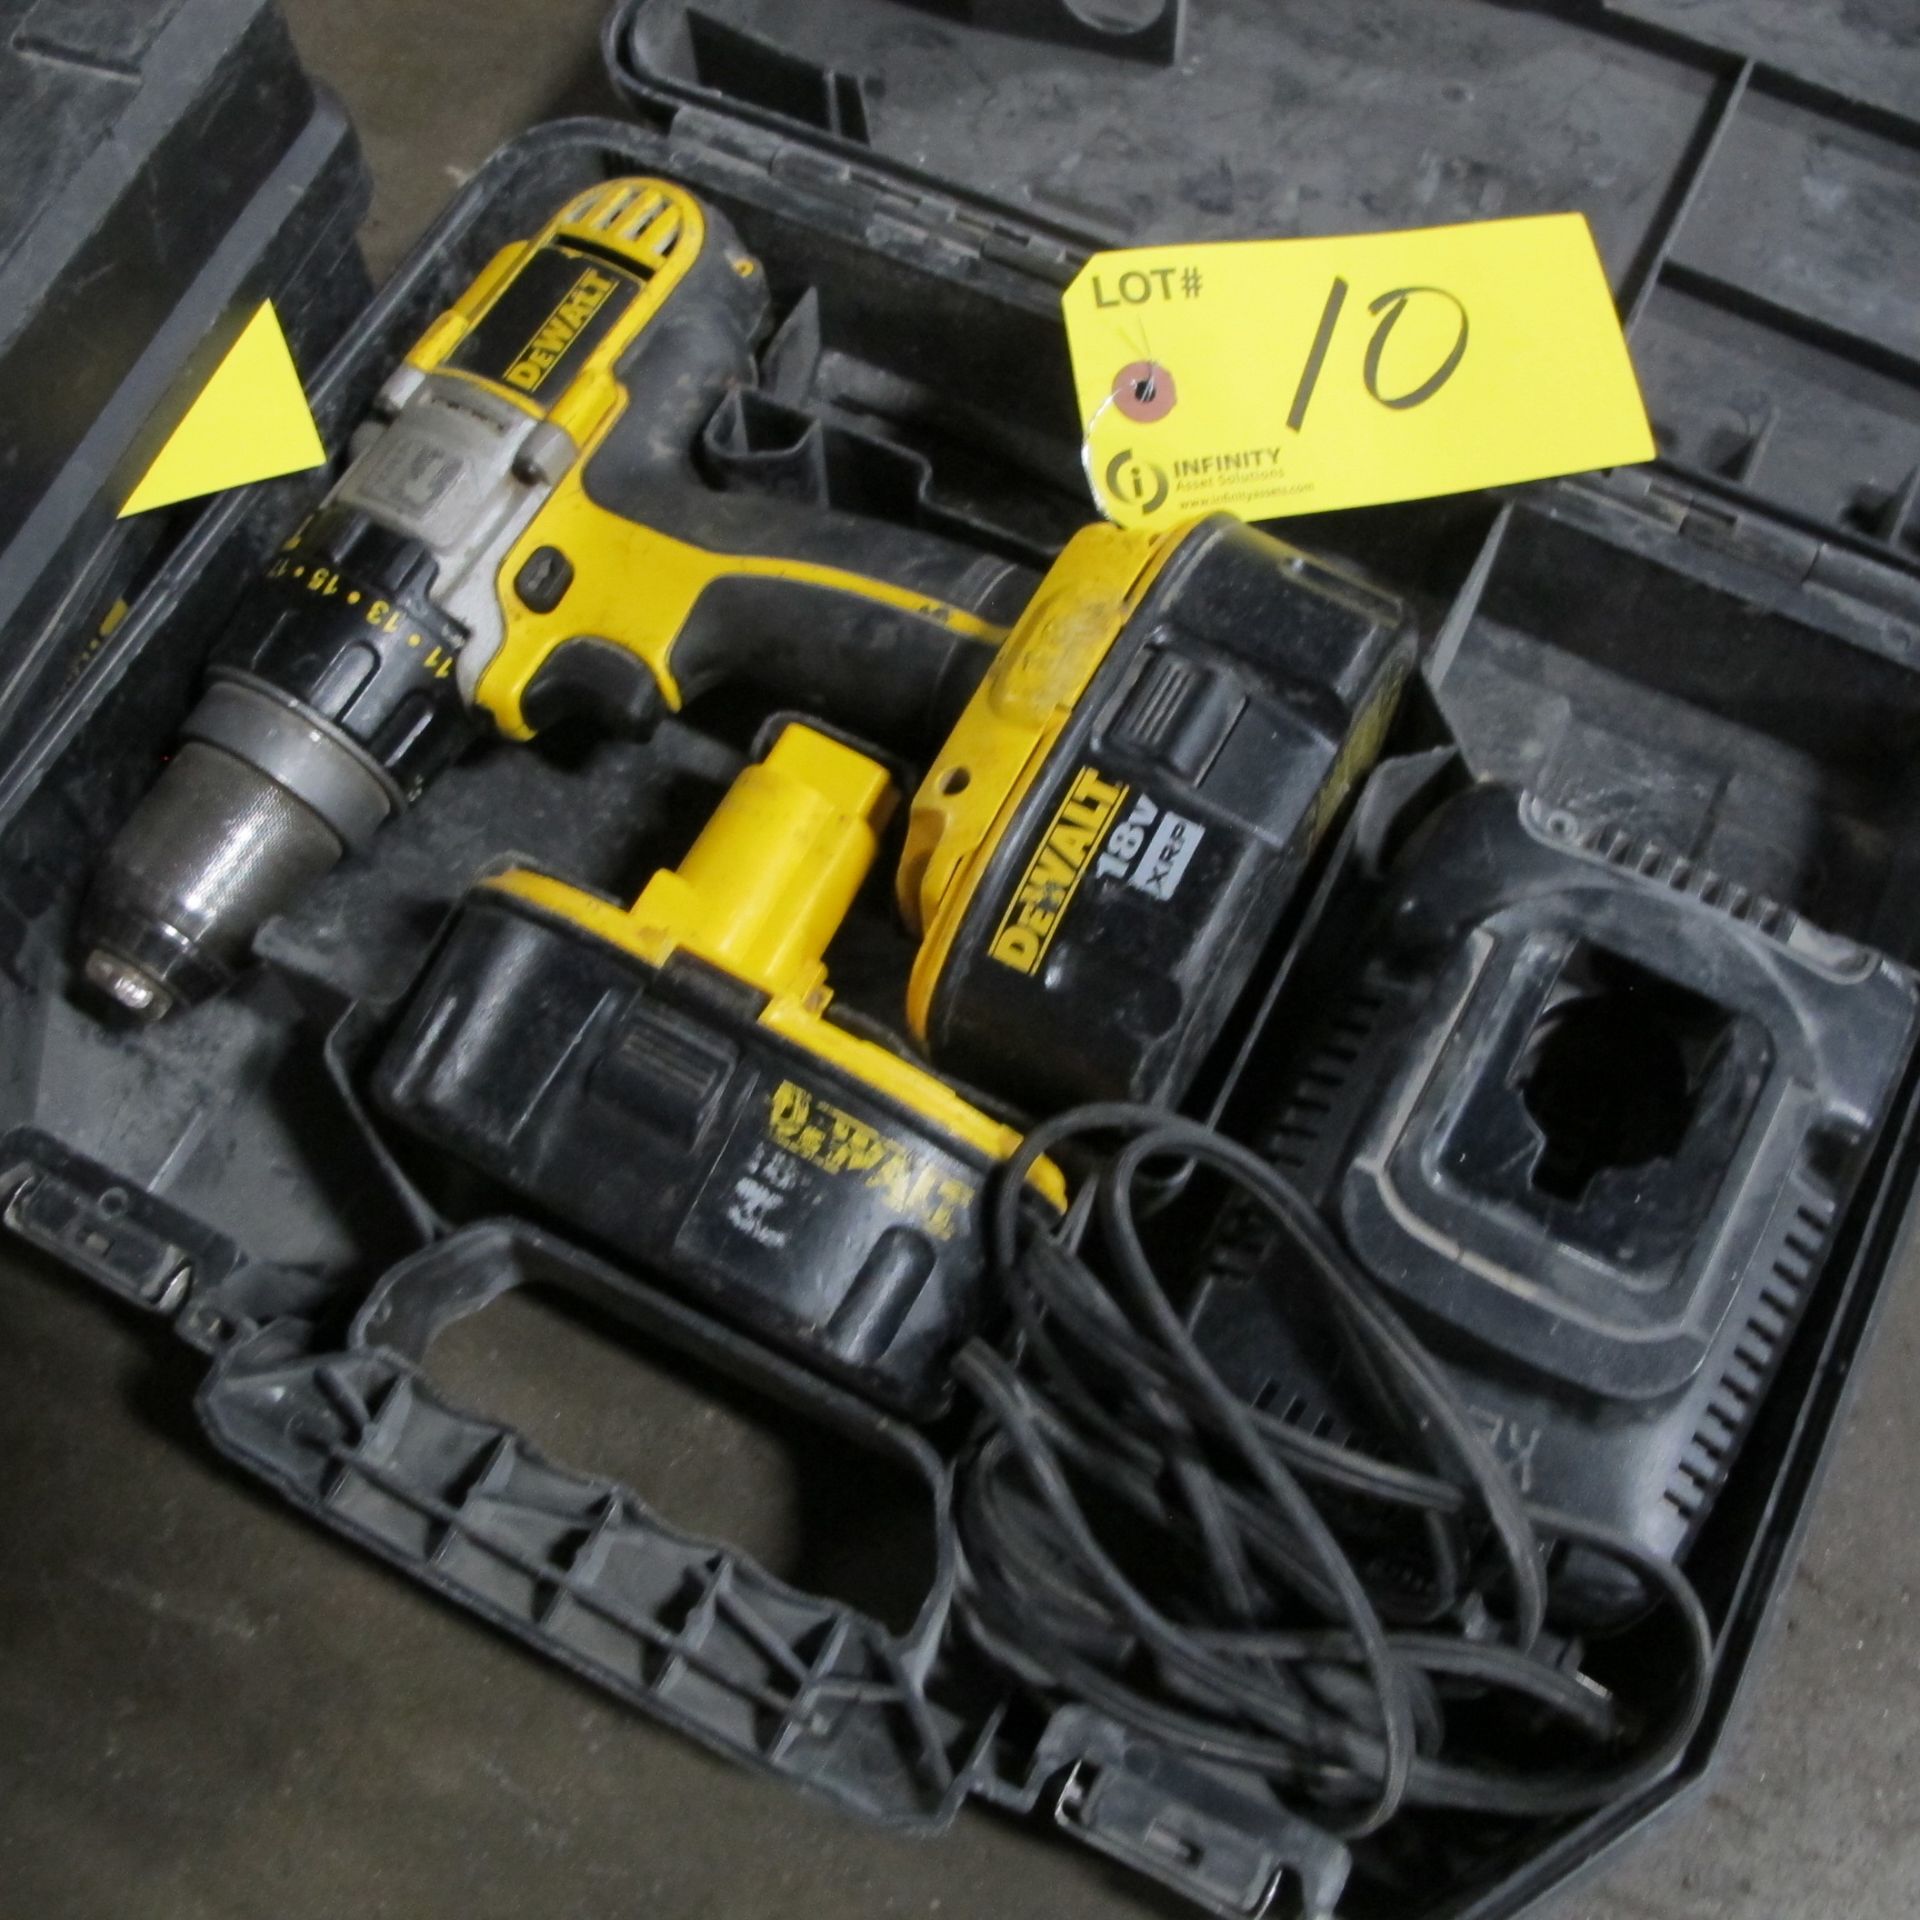 DEWALT DCD950 CORDLESS DRILL W/ (2) 18V BATTERIES, CHARGER AND CASE